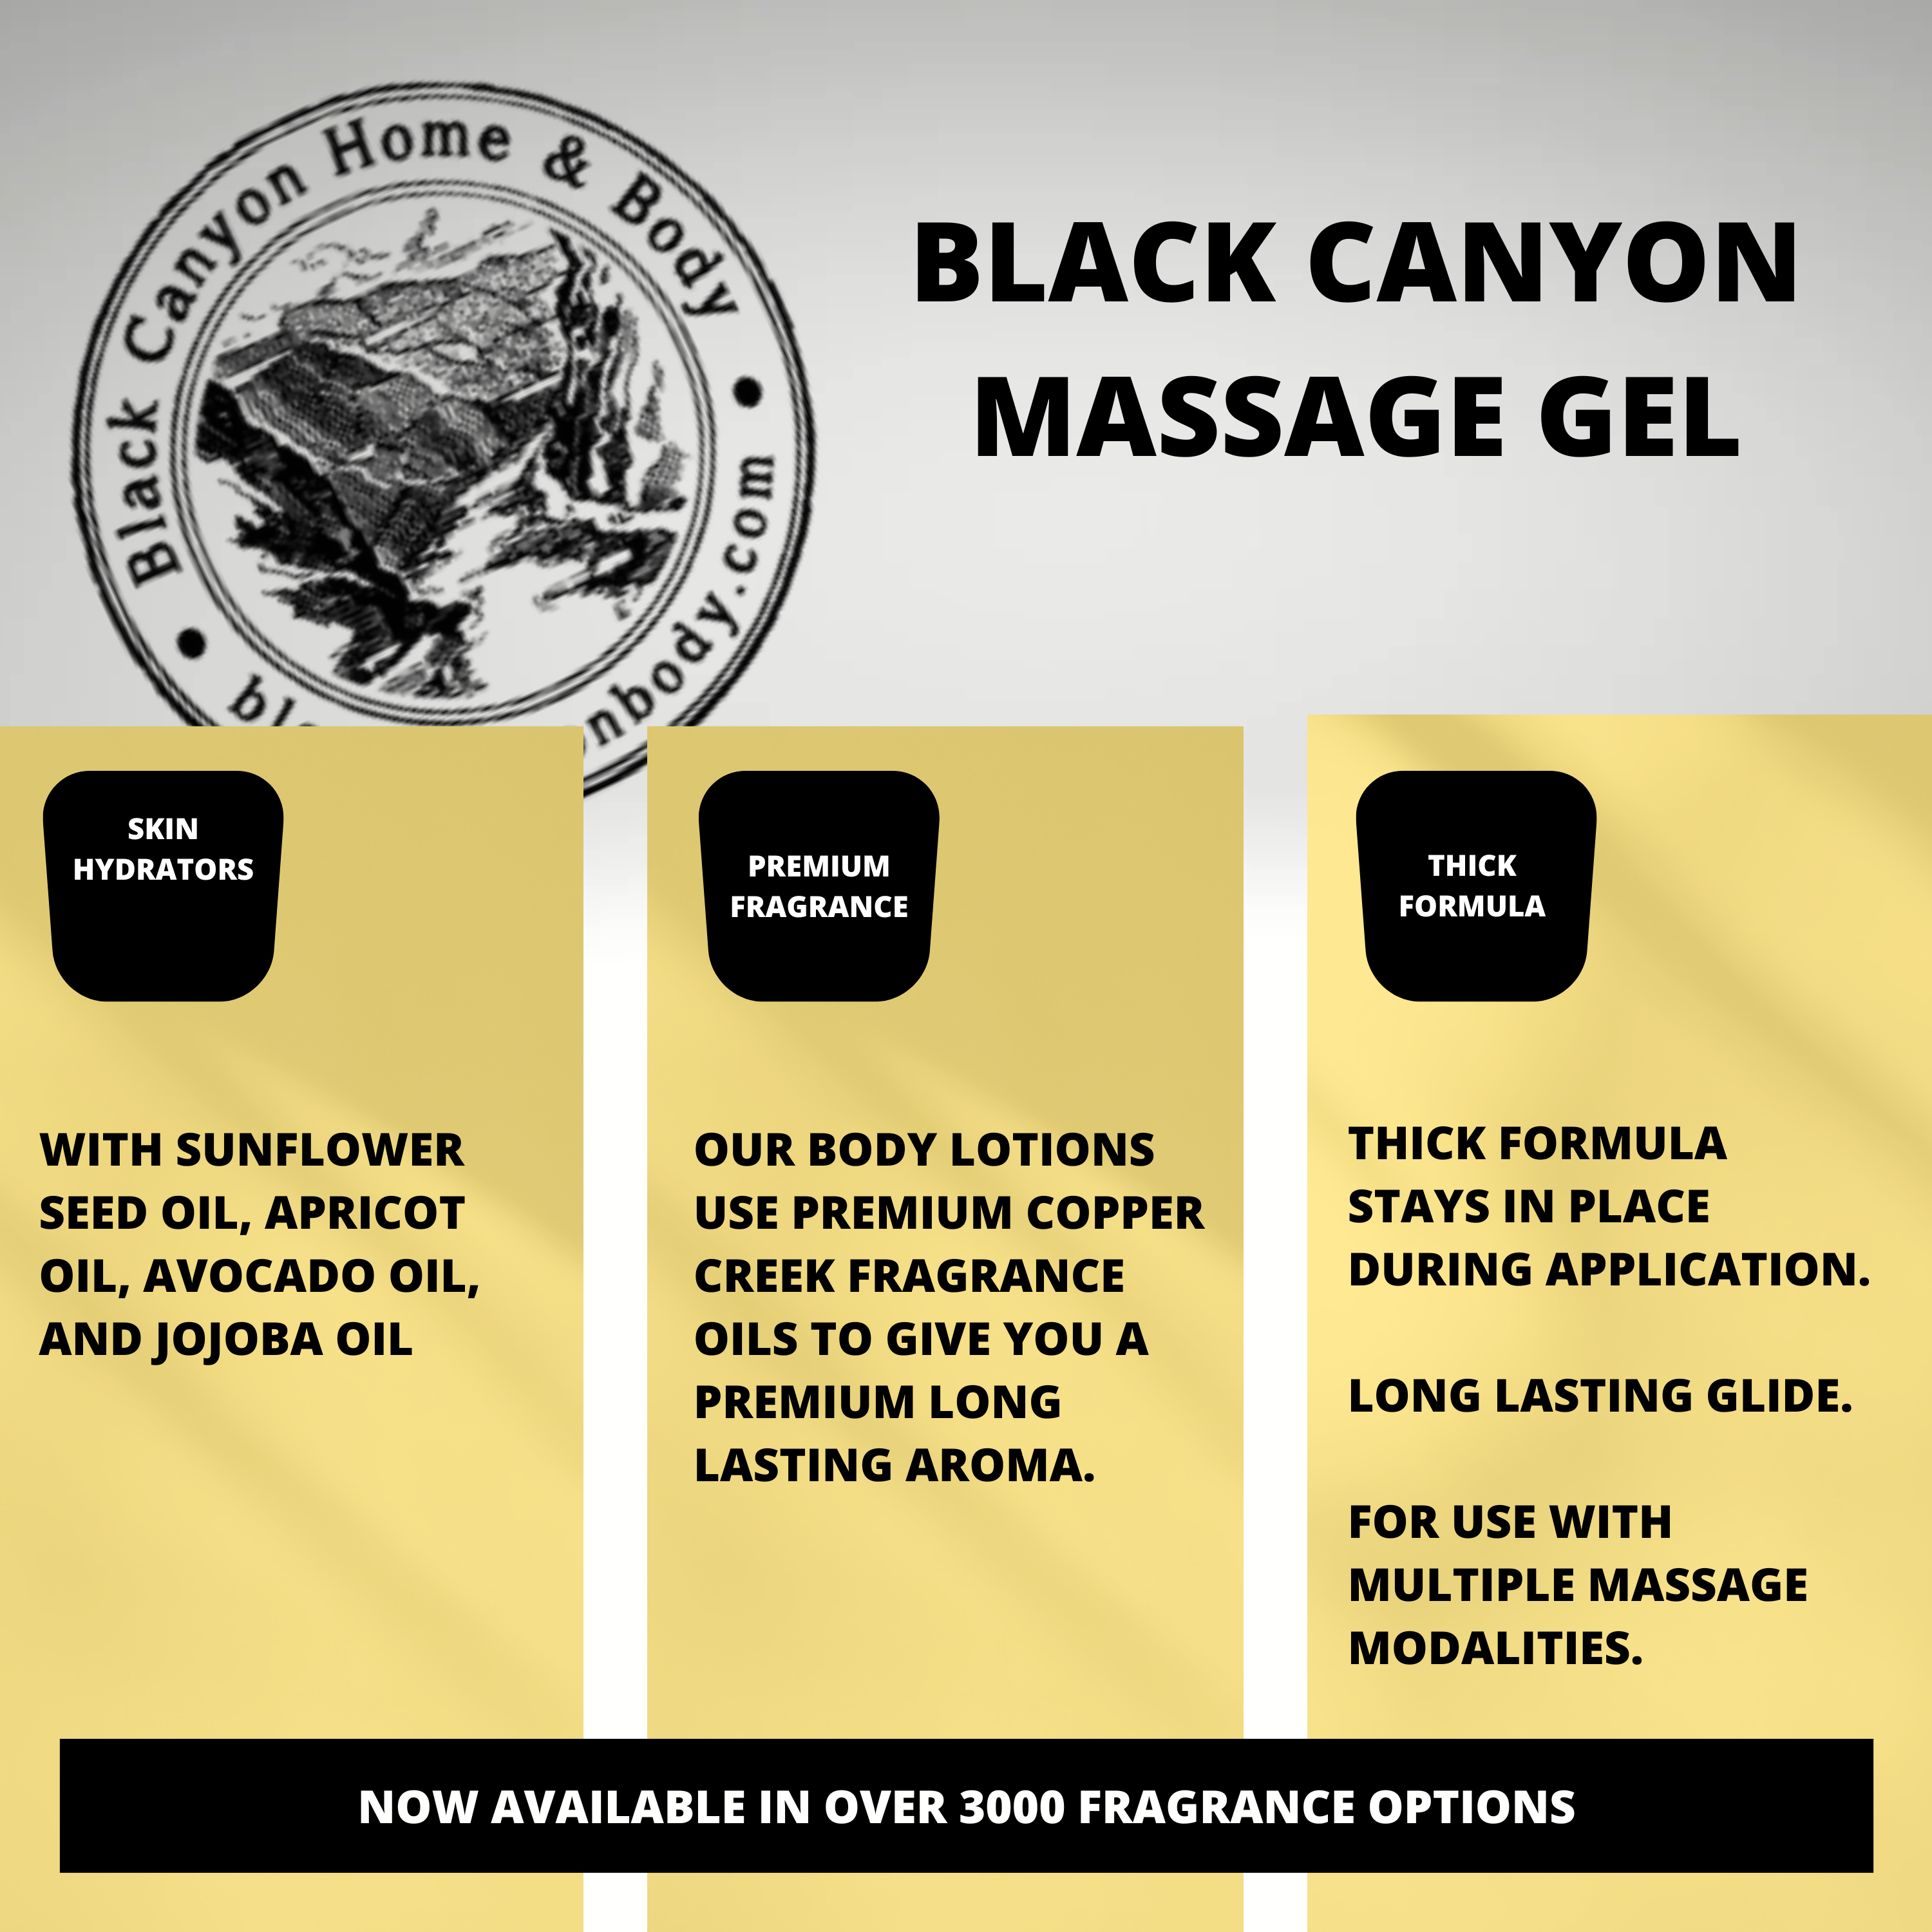 Black Canyon Apothecary Grapefruit Scented Massage Gel